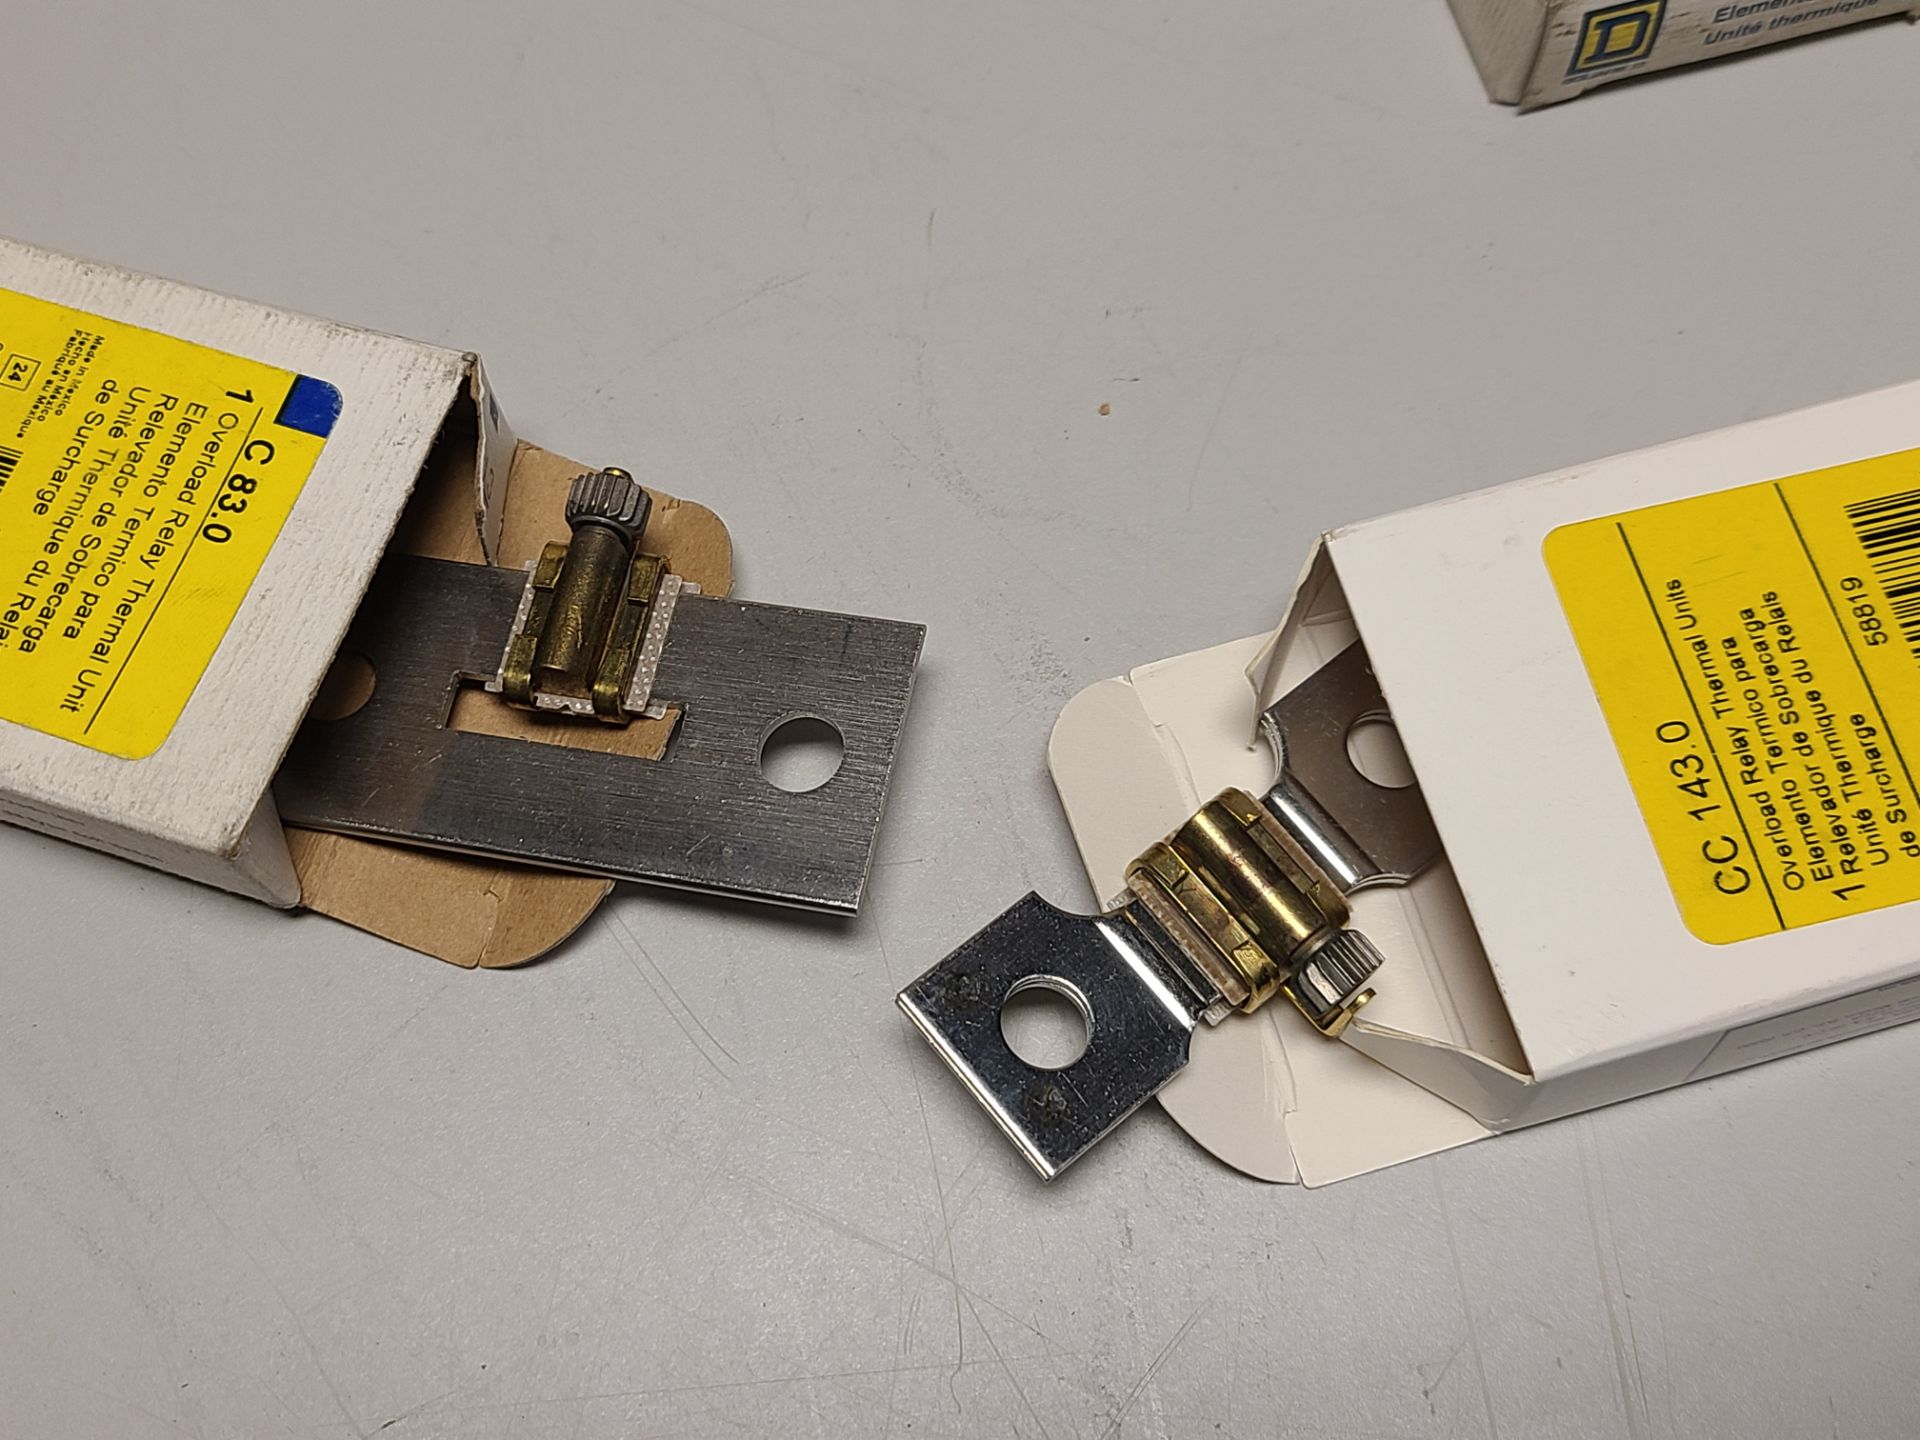 LOT OF NEW SQUARE D OVERLOAD RELAY THERMAL UNITS - Image 2 of 2